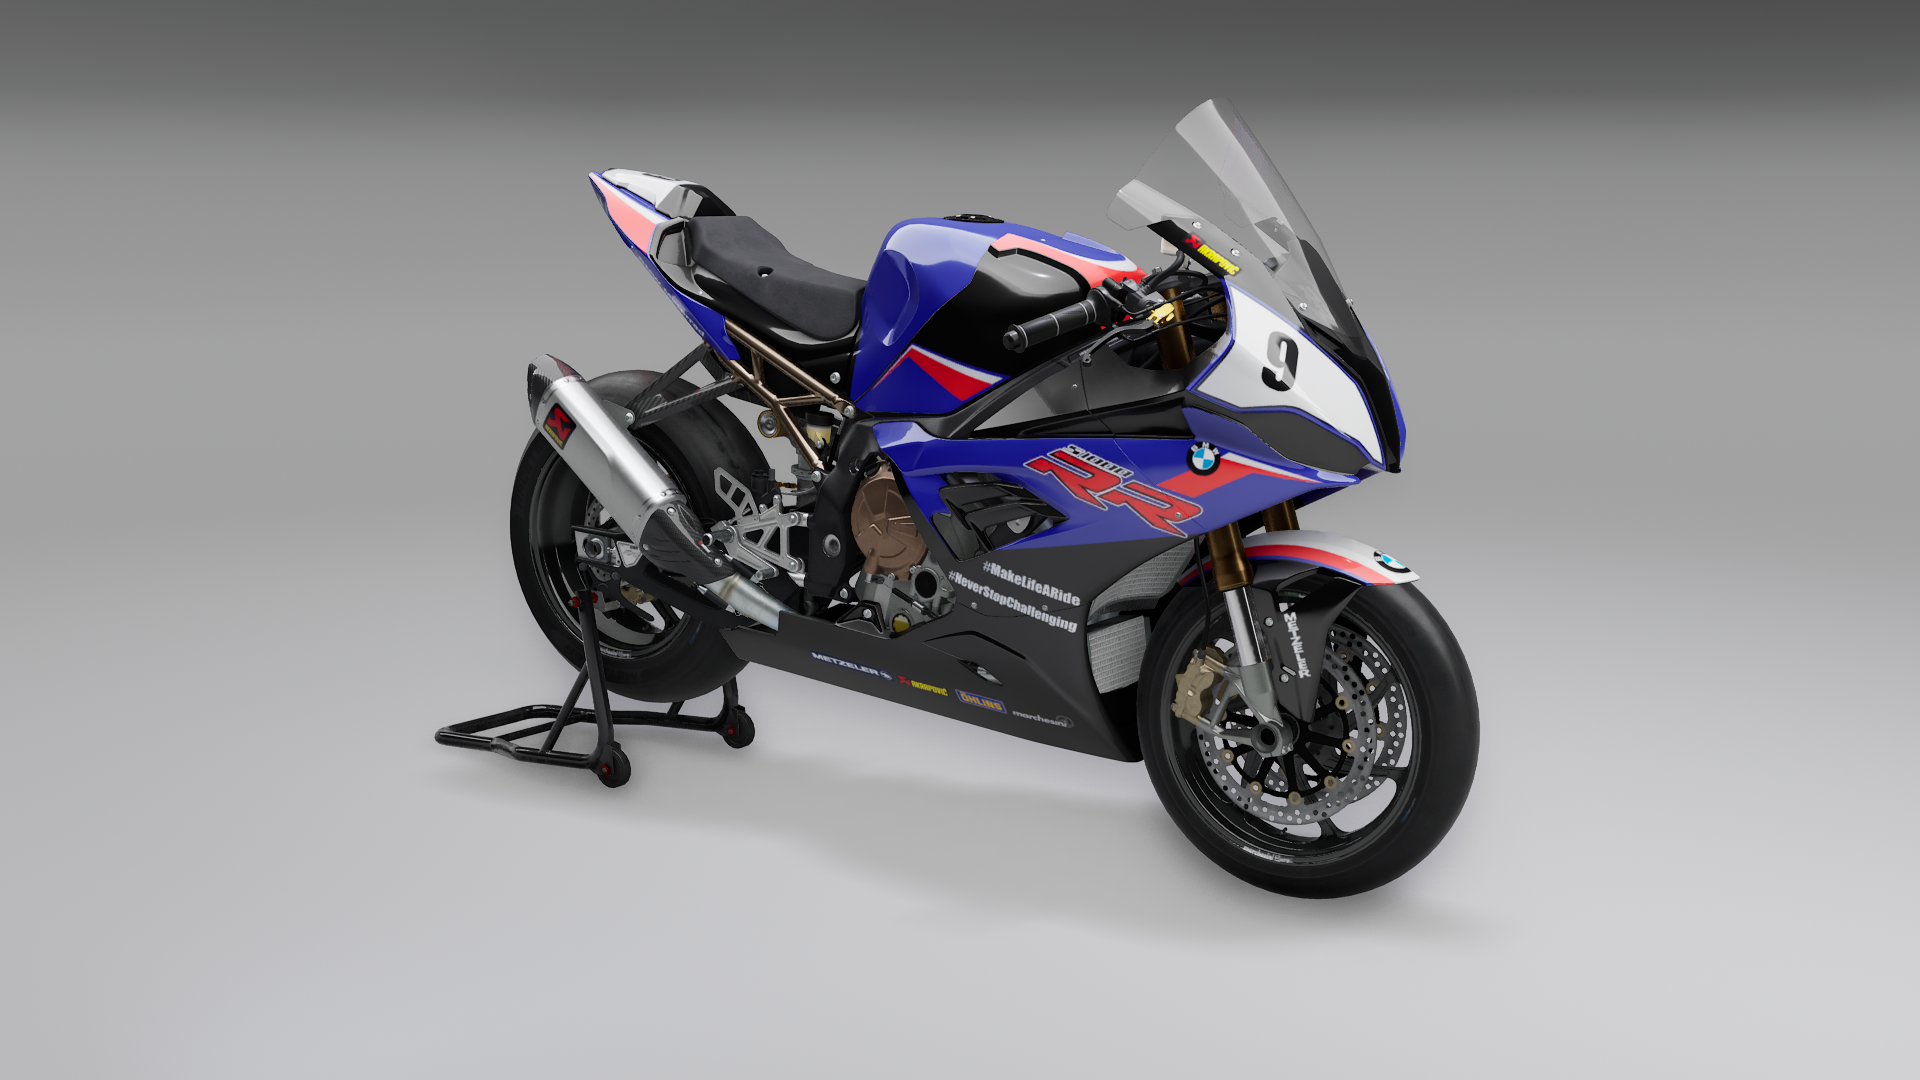 S 1000 RR Racing Modified